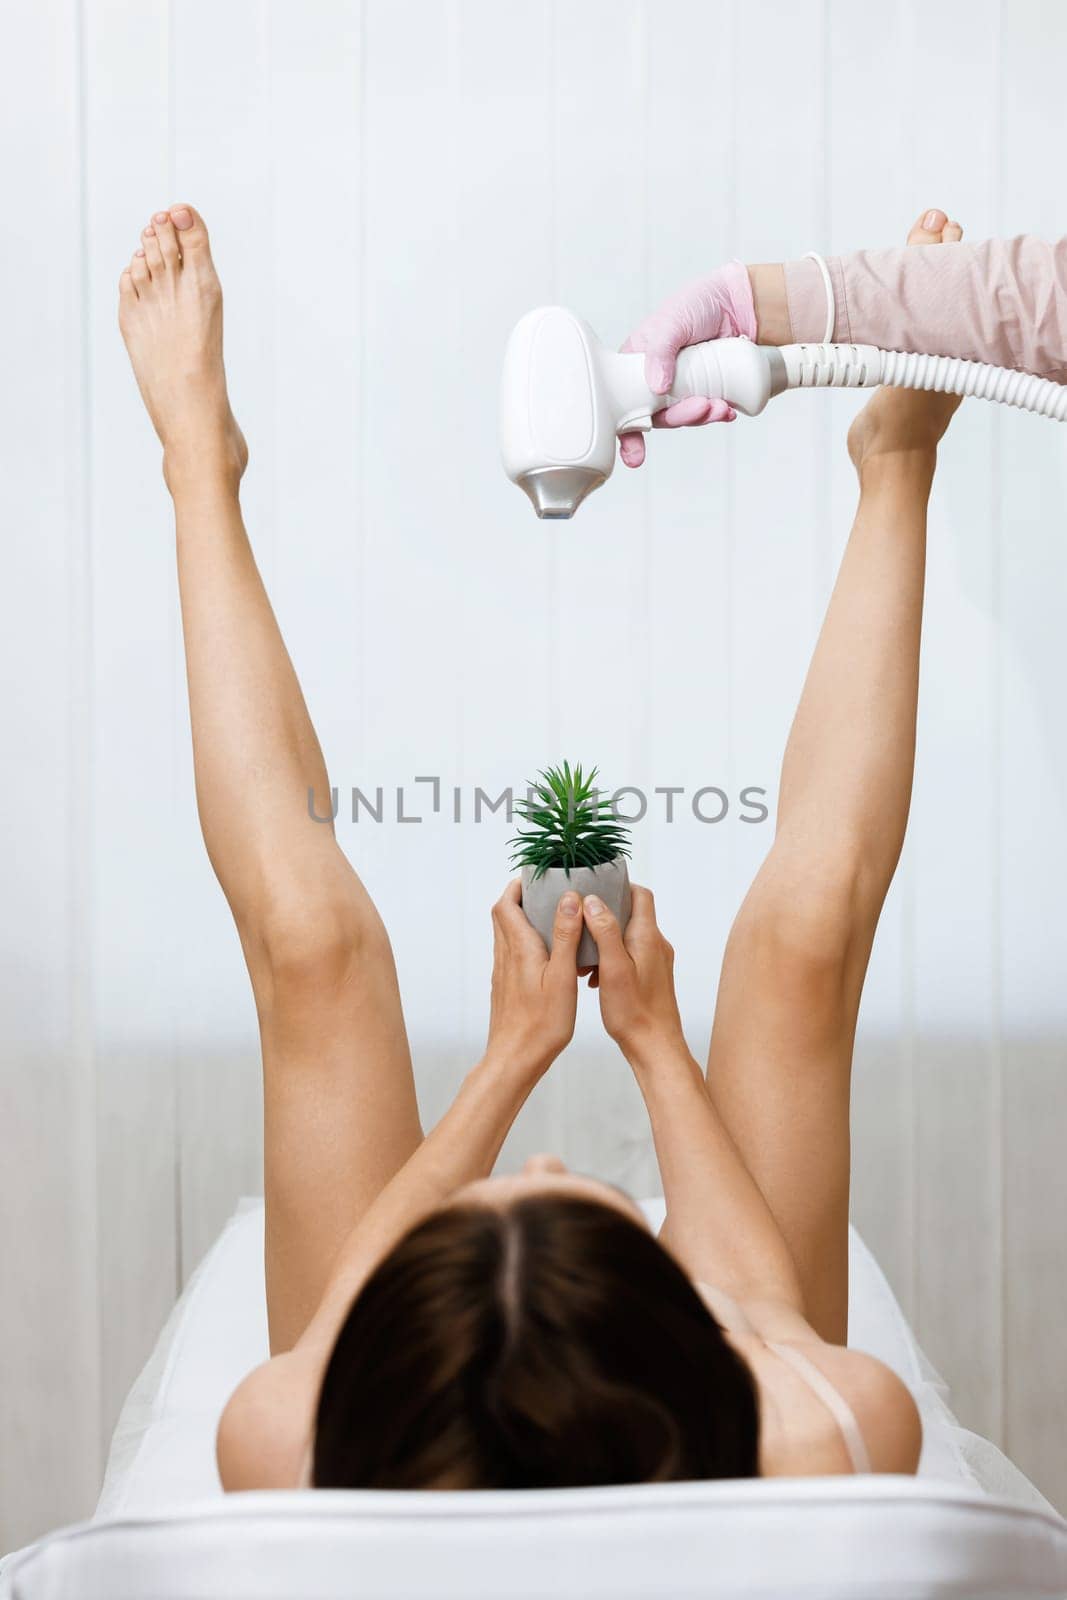 Bikini Laser hair removal. Woman lifted her beautiful long legs apart, holding a prickly plant between her legs. Hand holding laser gun of medical equipment. Concept of depilation and epilation.